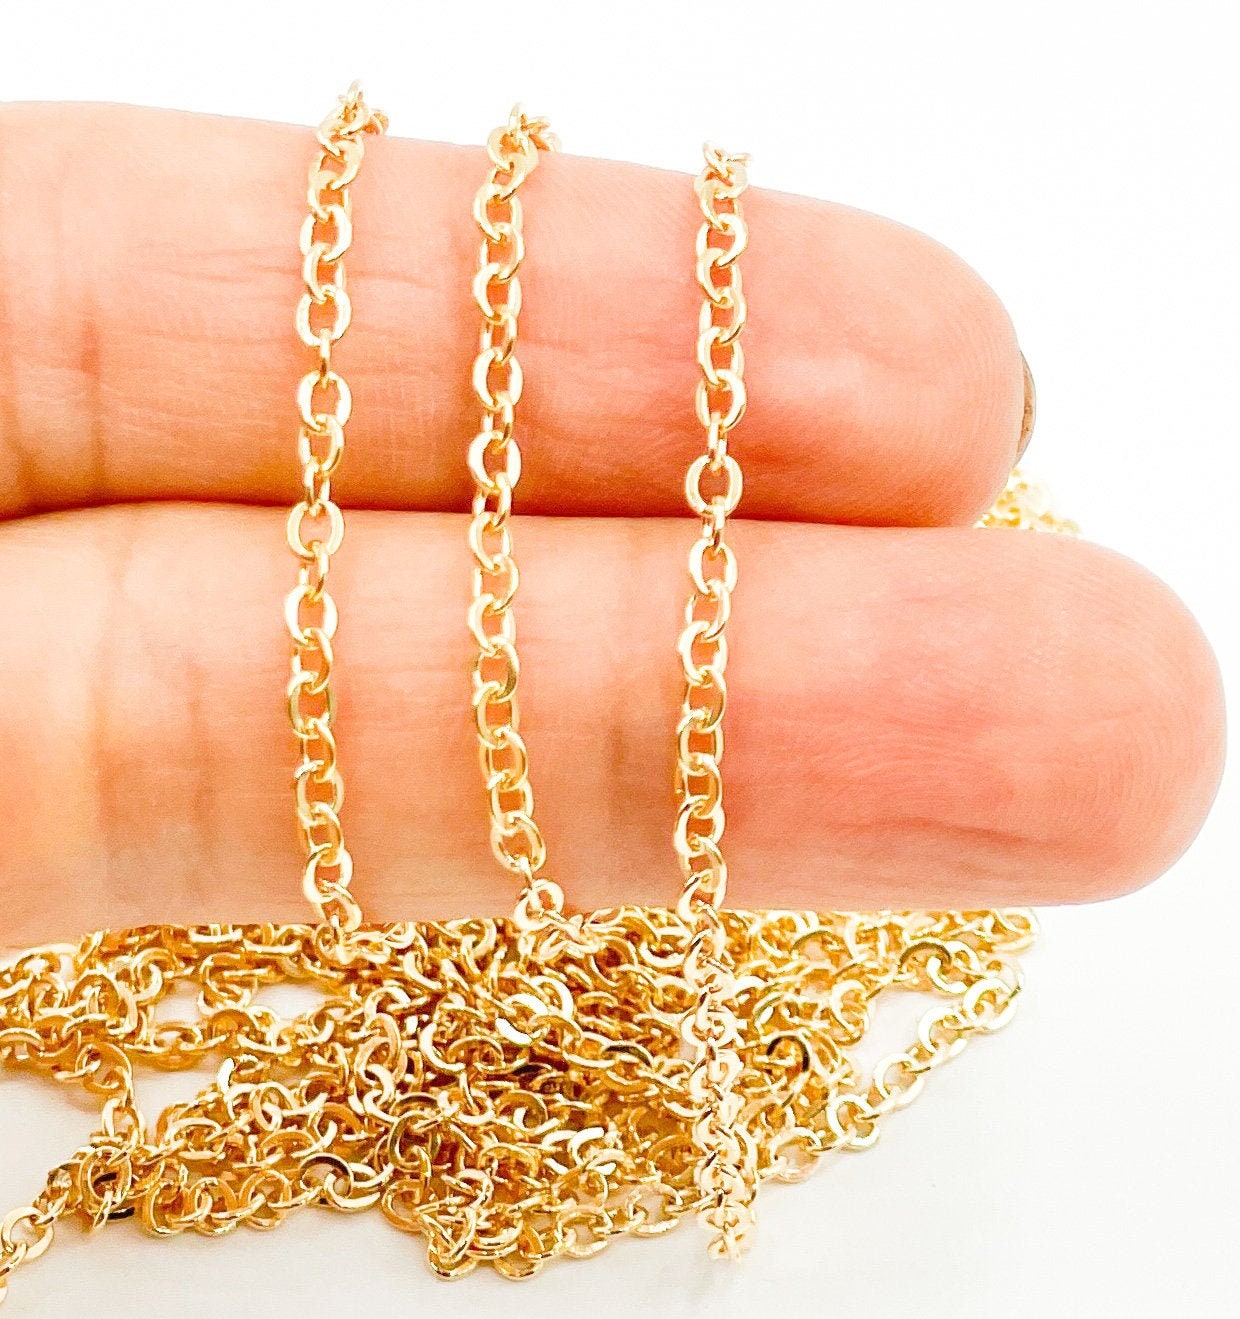 14K Gold Filled 2mm Width Flat Round Cable Chain Chain by Foot Wholesale Bulk Jewelry Findings Necklace Chain Sparkling Chain